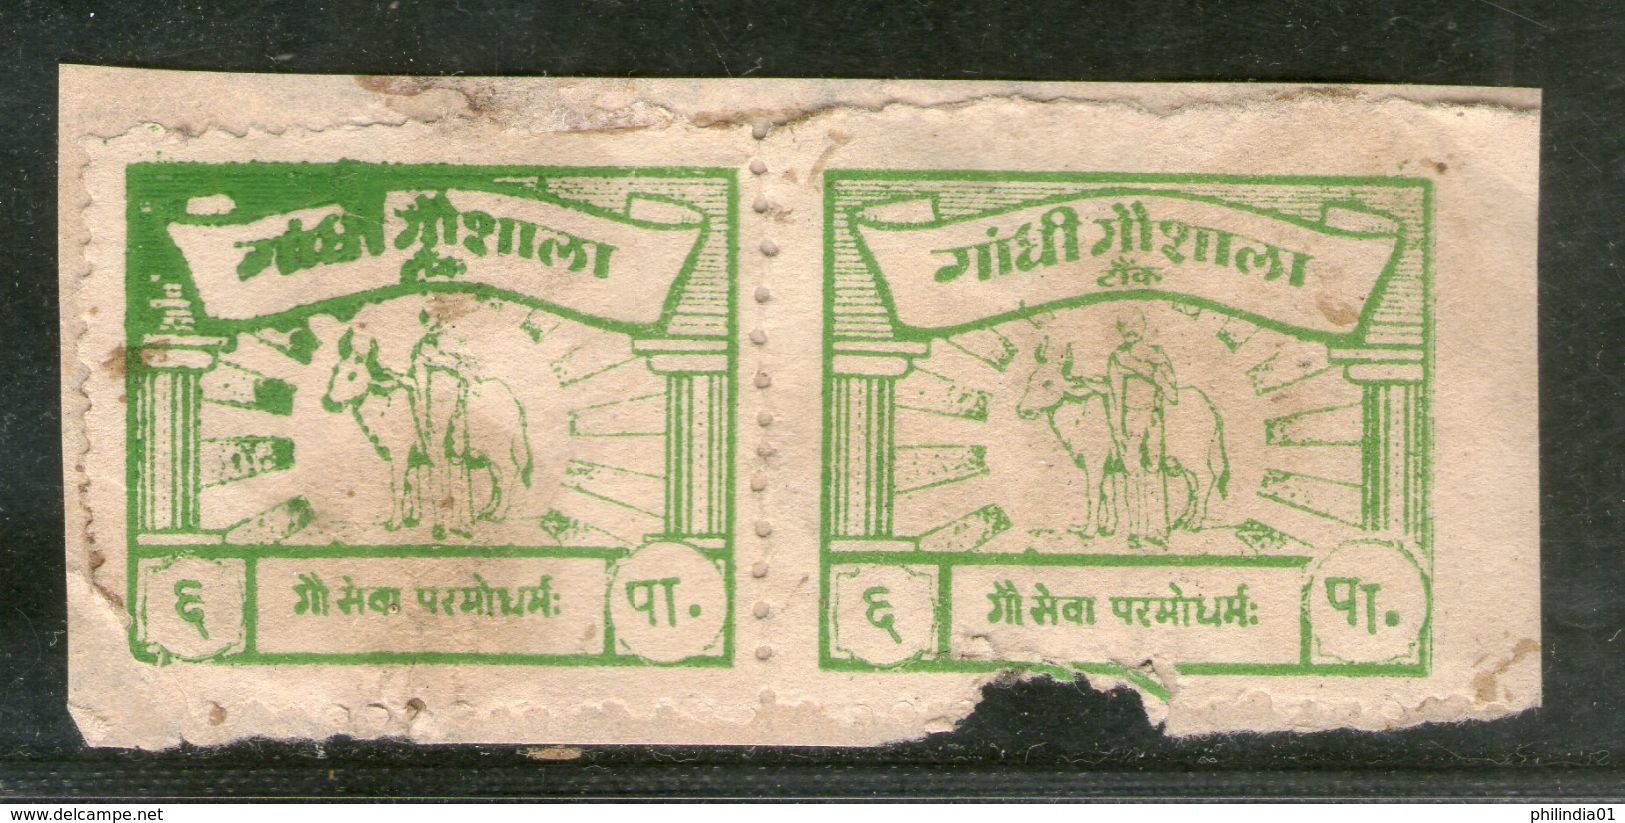 India 6ps Gandhi Gaushala Tonk Charity Label Pair Extremely RARE # 530 - Timbres De Bienfaisance